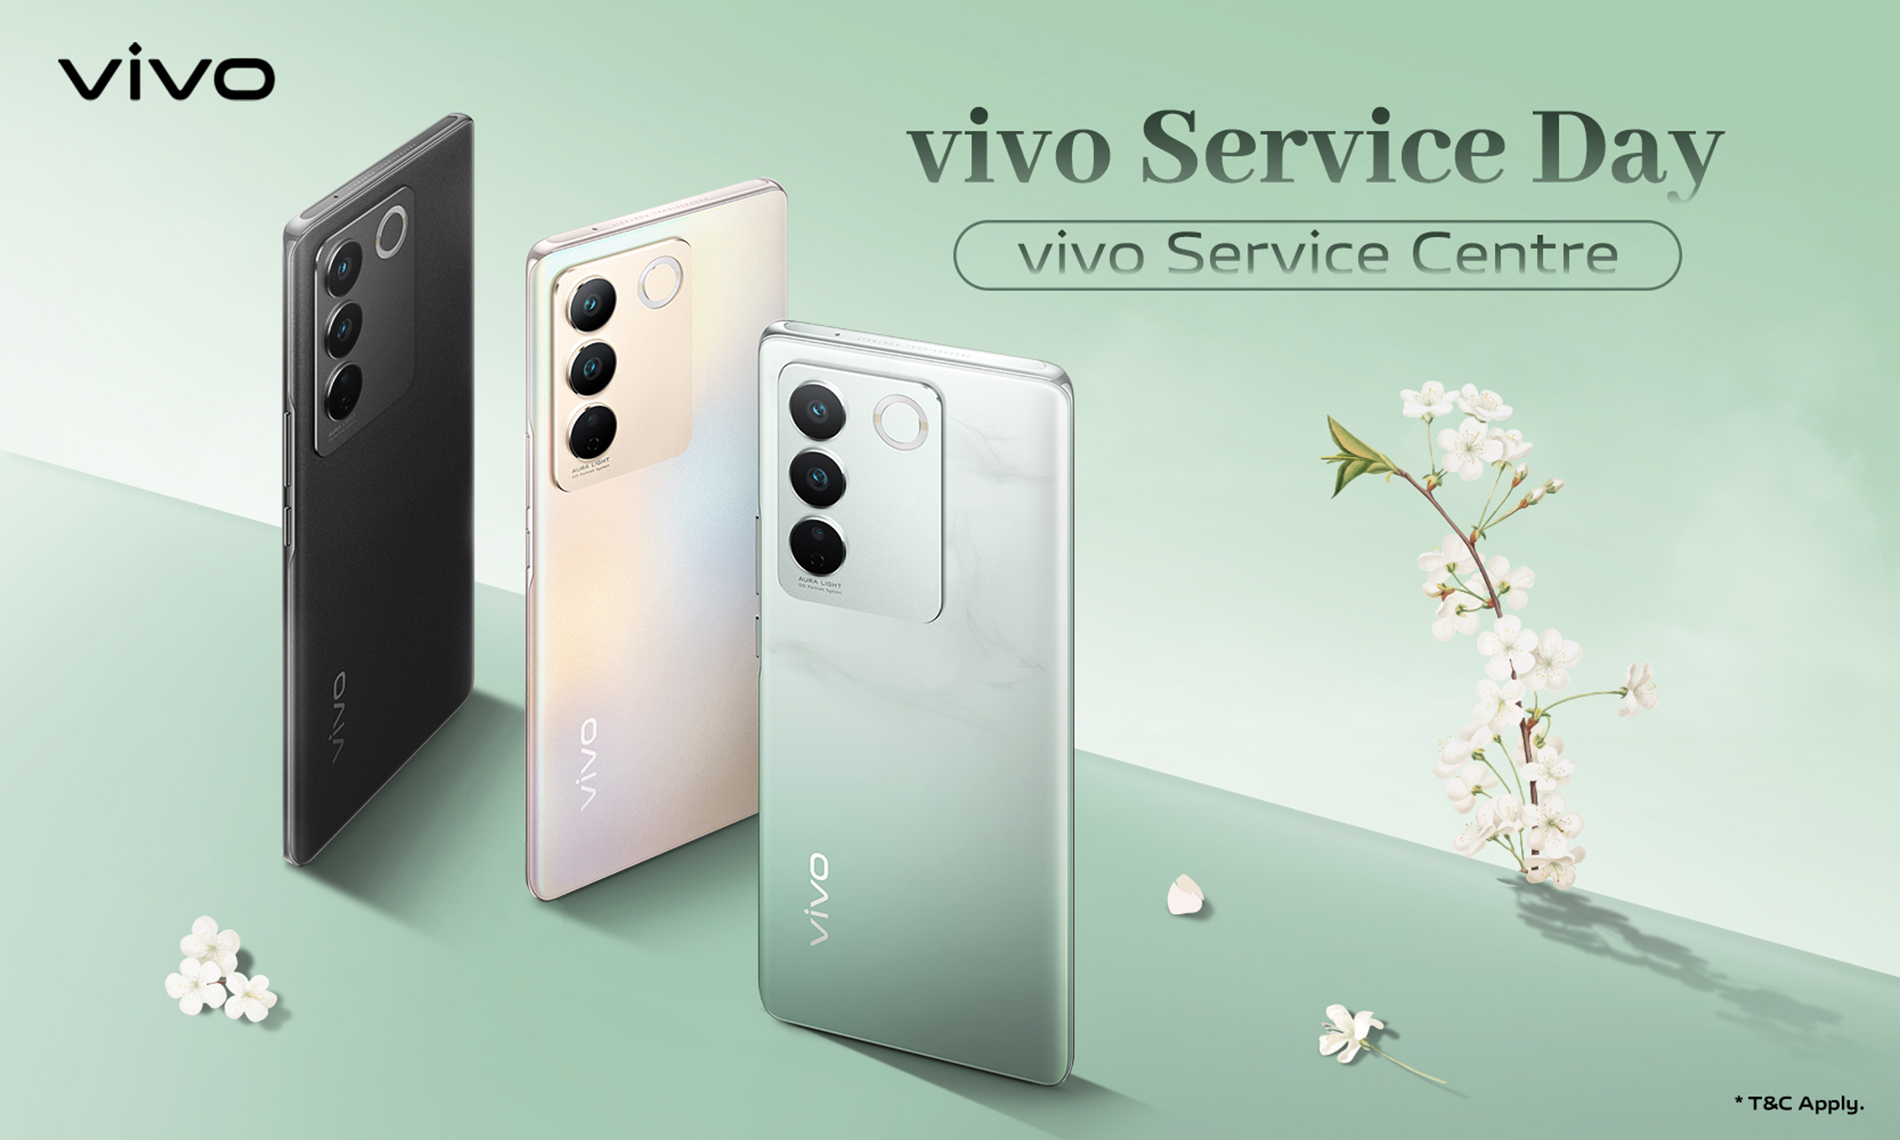 vivo Service Day in March